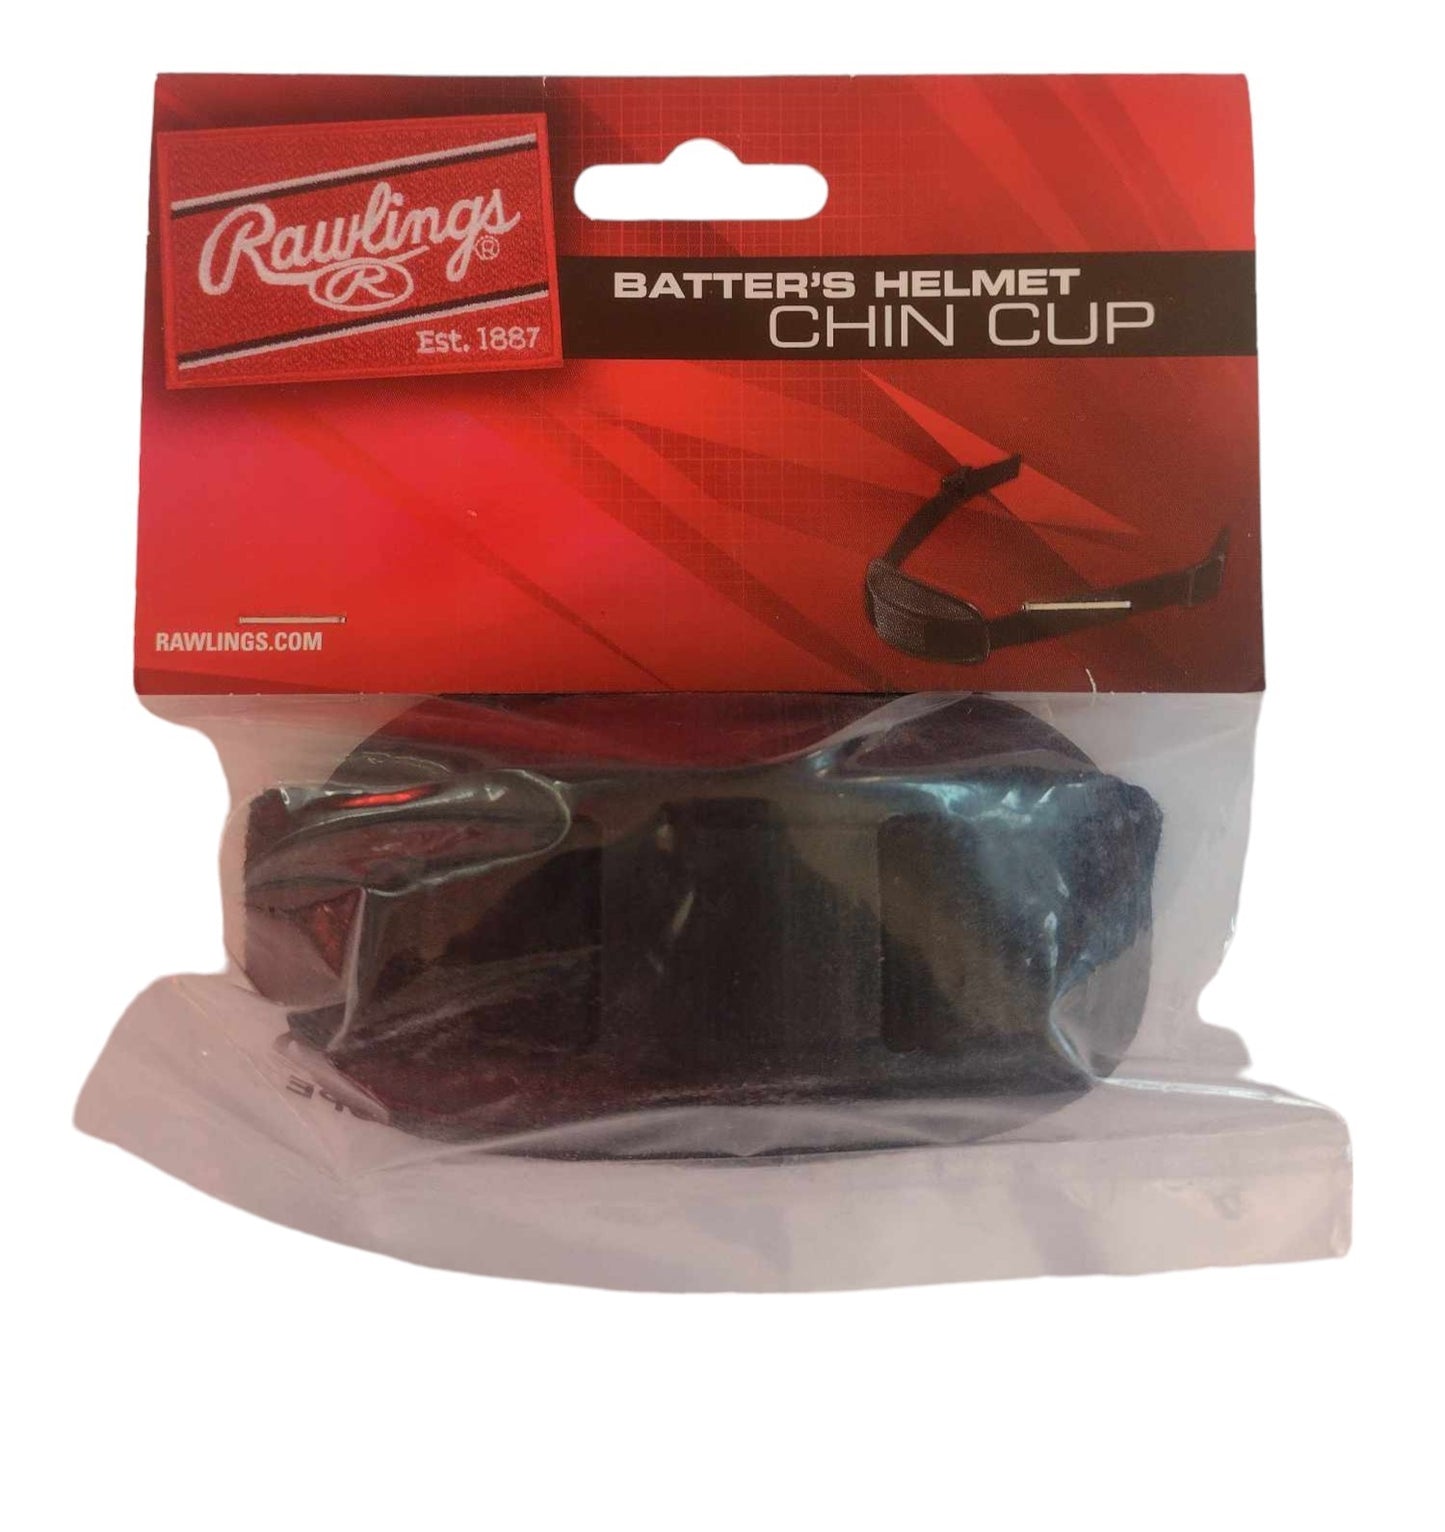 Rawlings Batting Helmet Chin Strap with Chin Cup